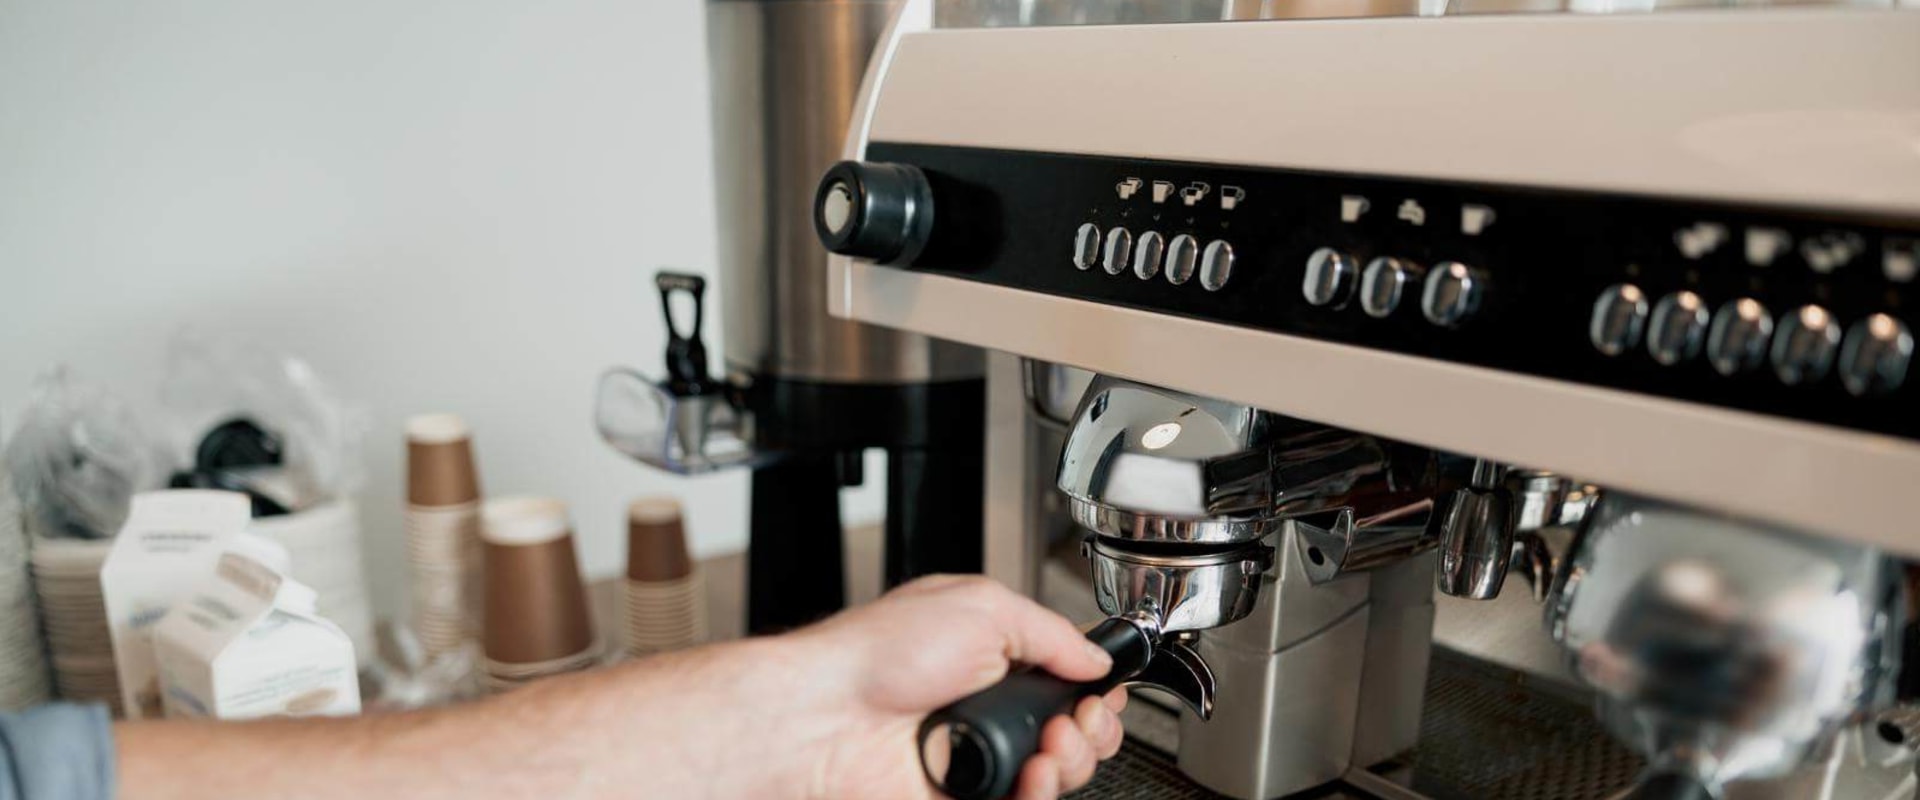 Can you use any kind of coffee in an espresso machine?